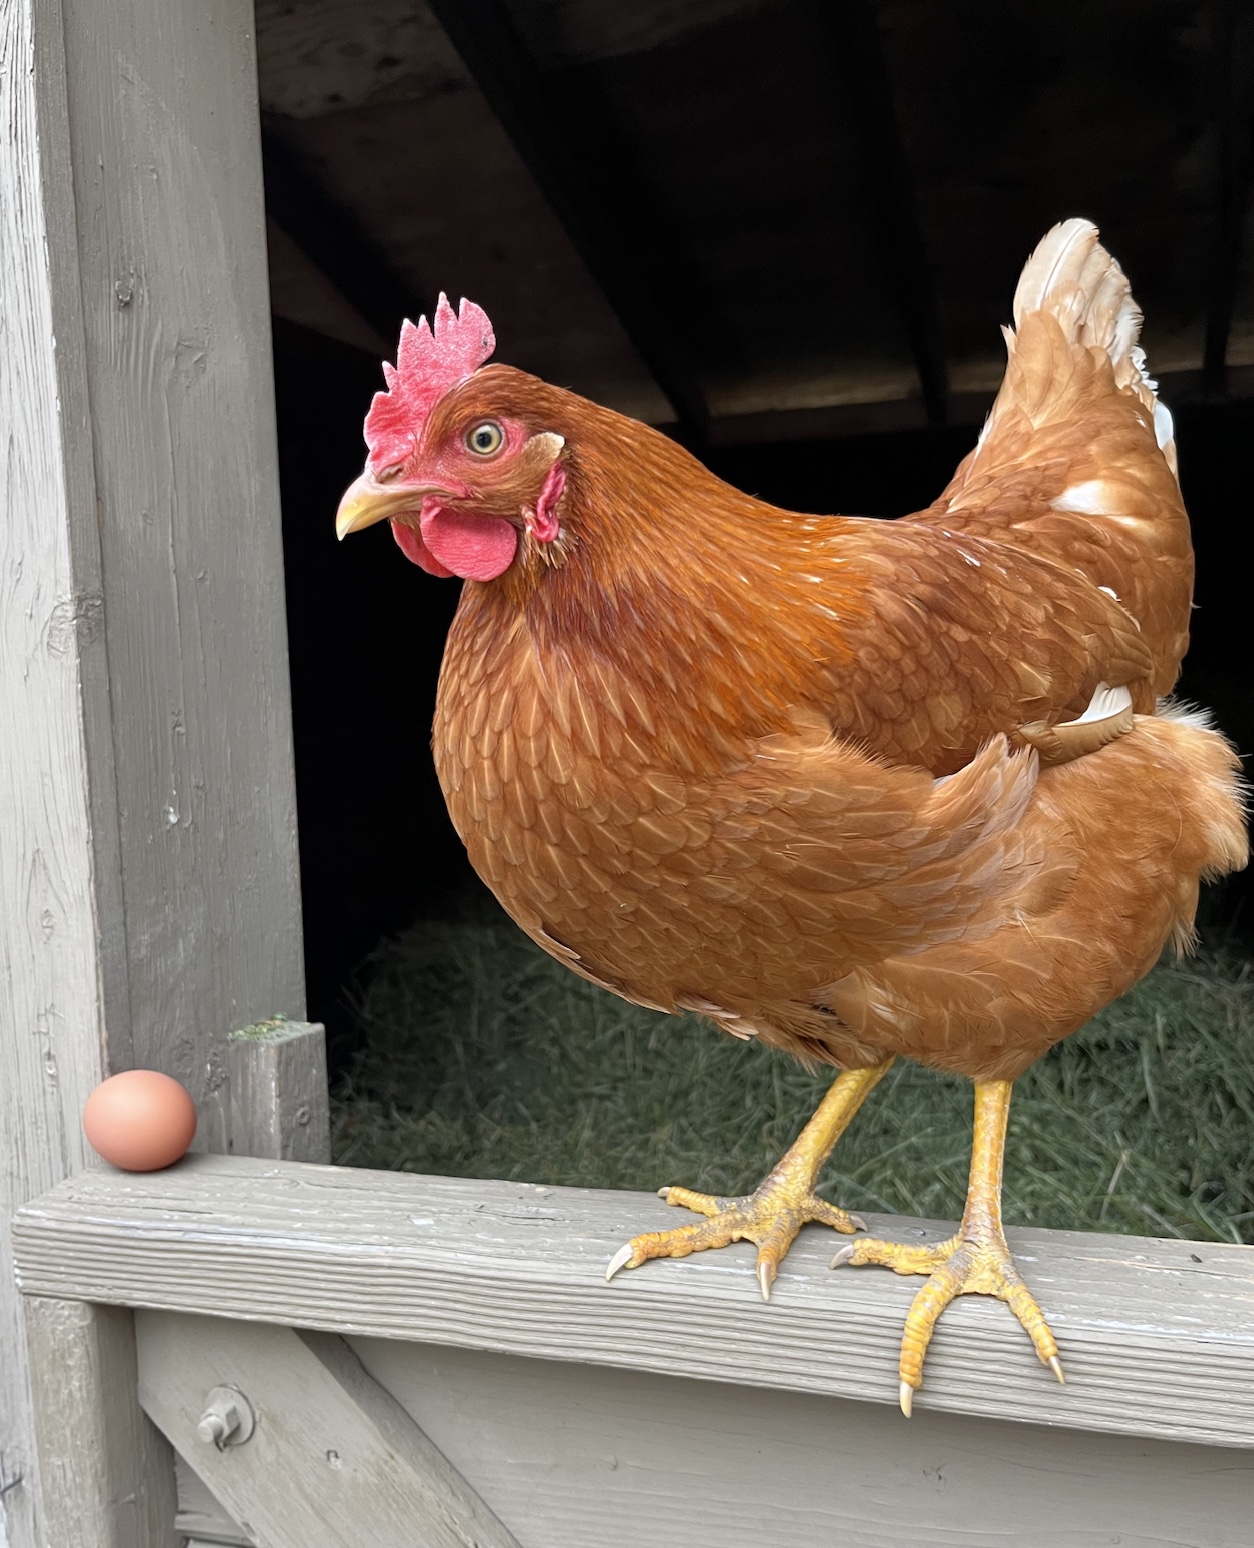 Gail Damerow Discusses Egg Quality - Murray McMurray Hatchery Blog